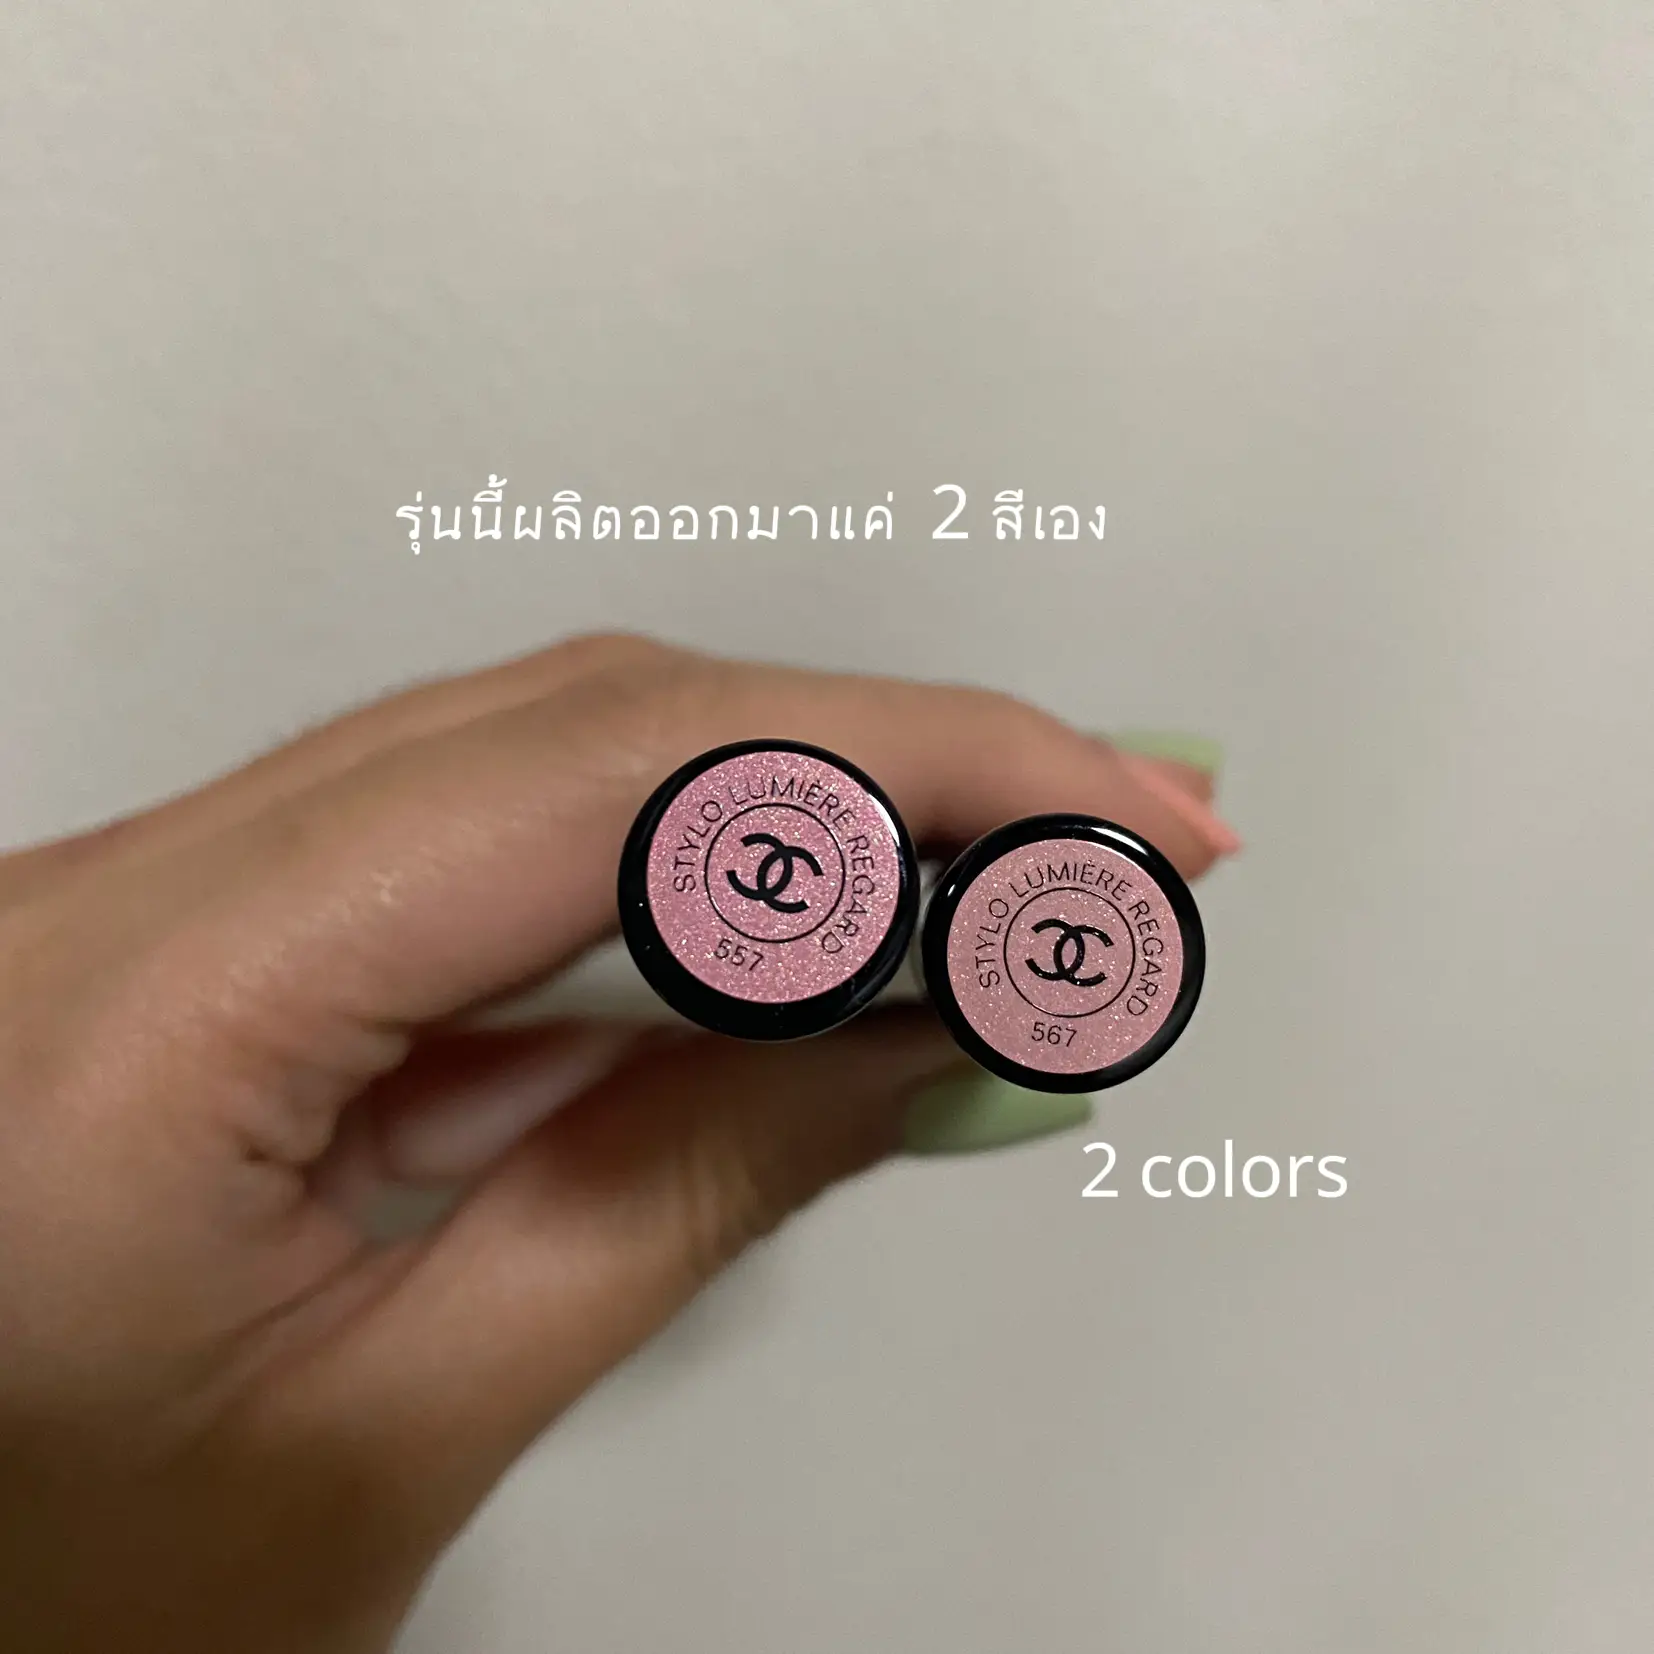 Liquid eyeshadow worth having in possession of CHANEL, Gallery posted by  LittlecatReview